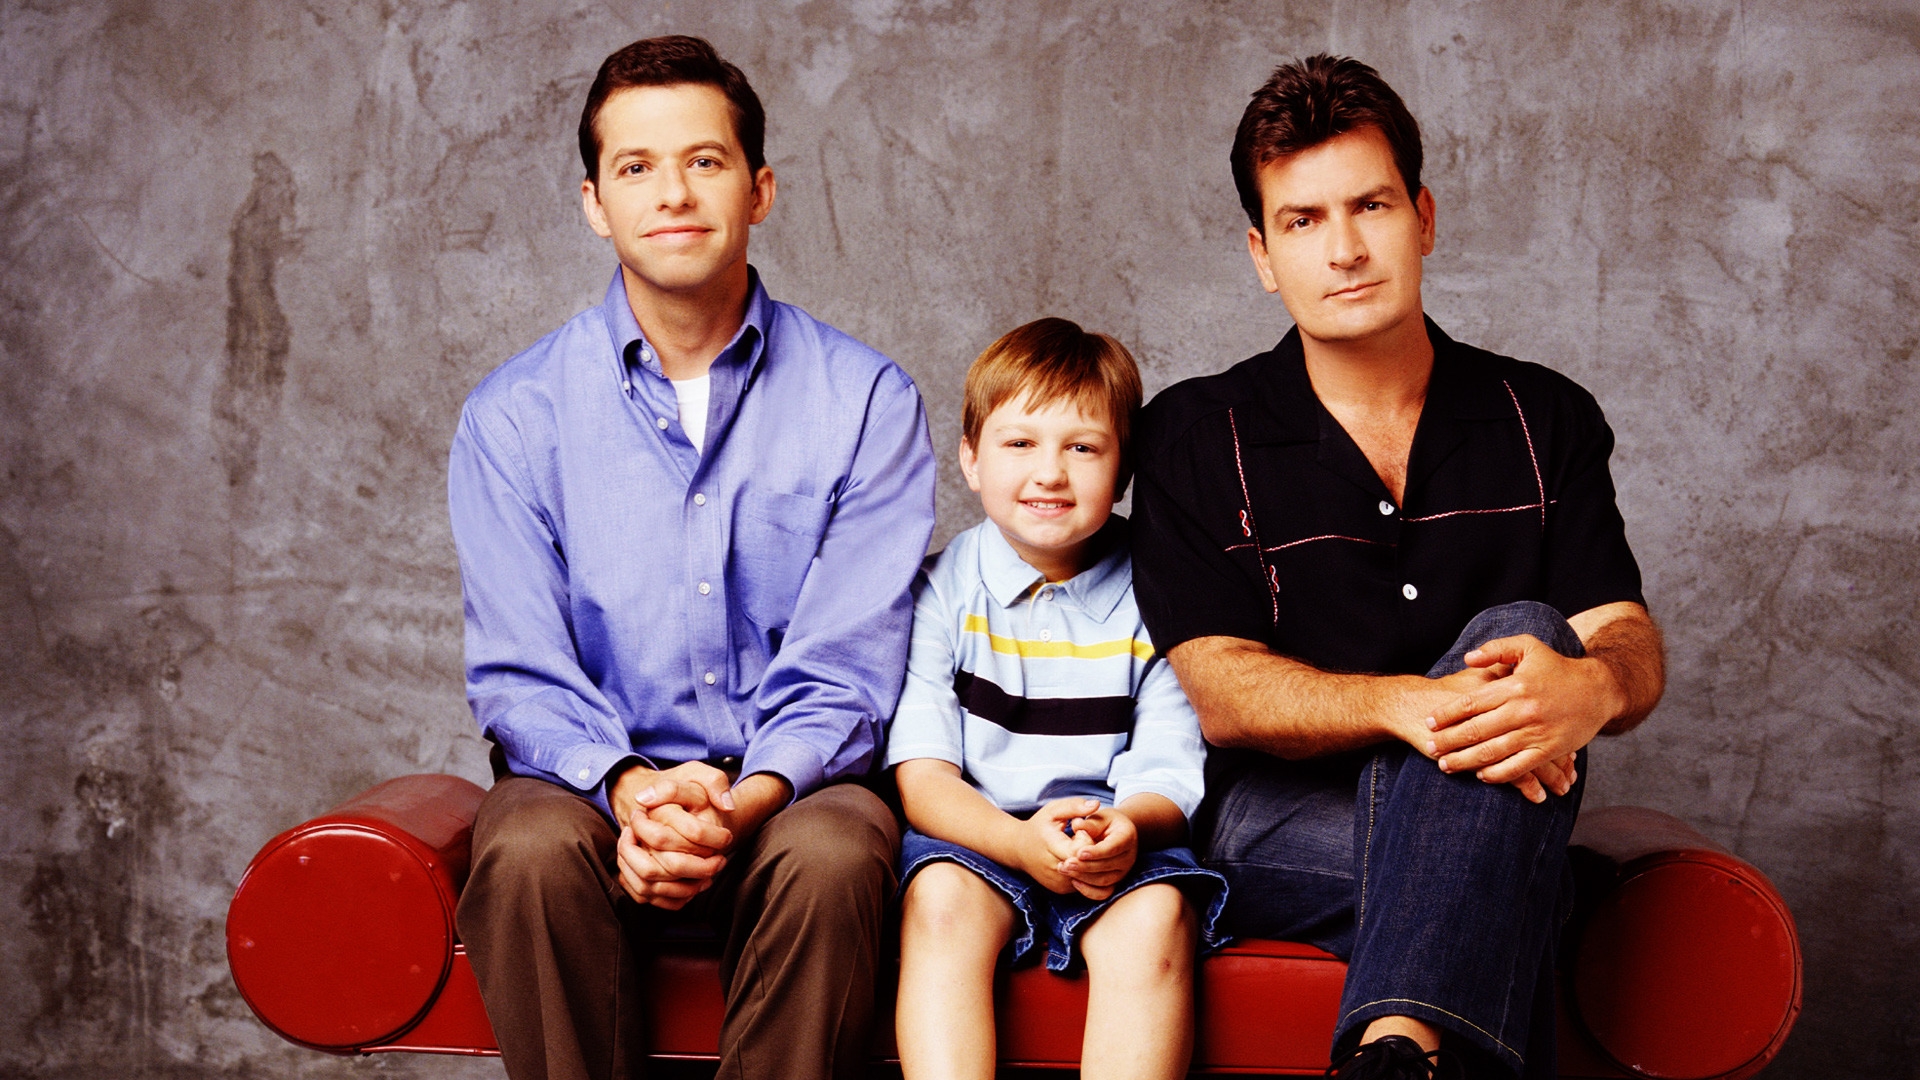 Two and a Half Men Poster for 1920 x 1080 HDTV 1080p resolution